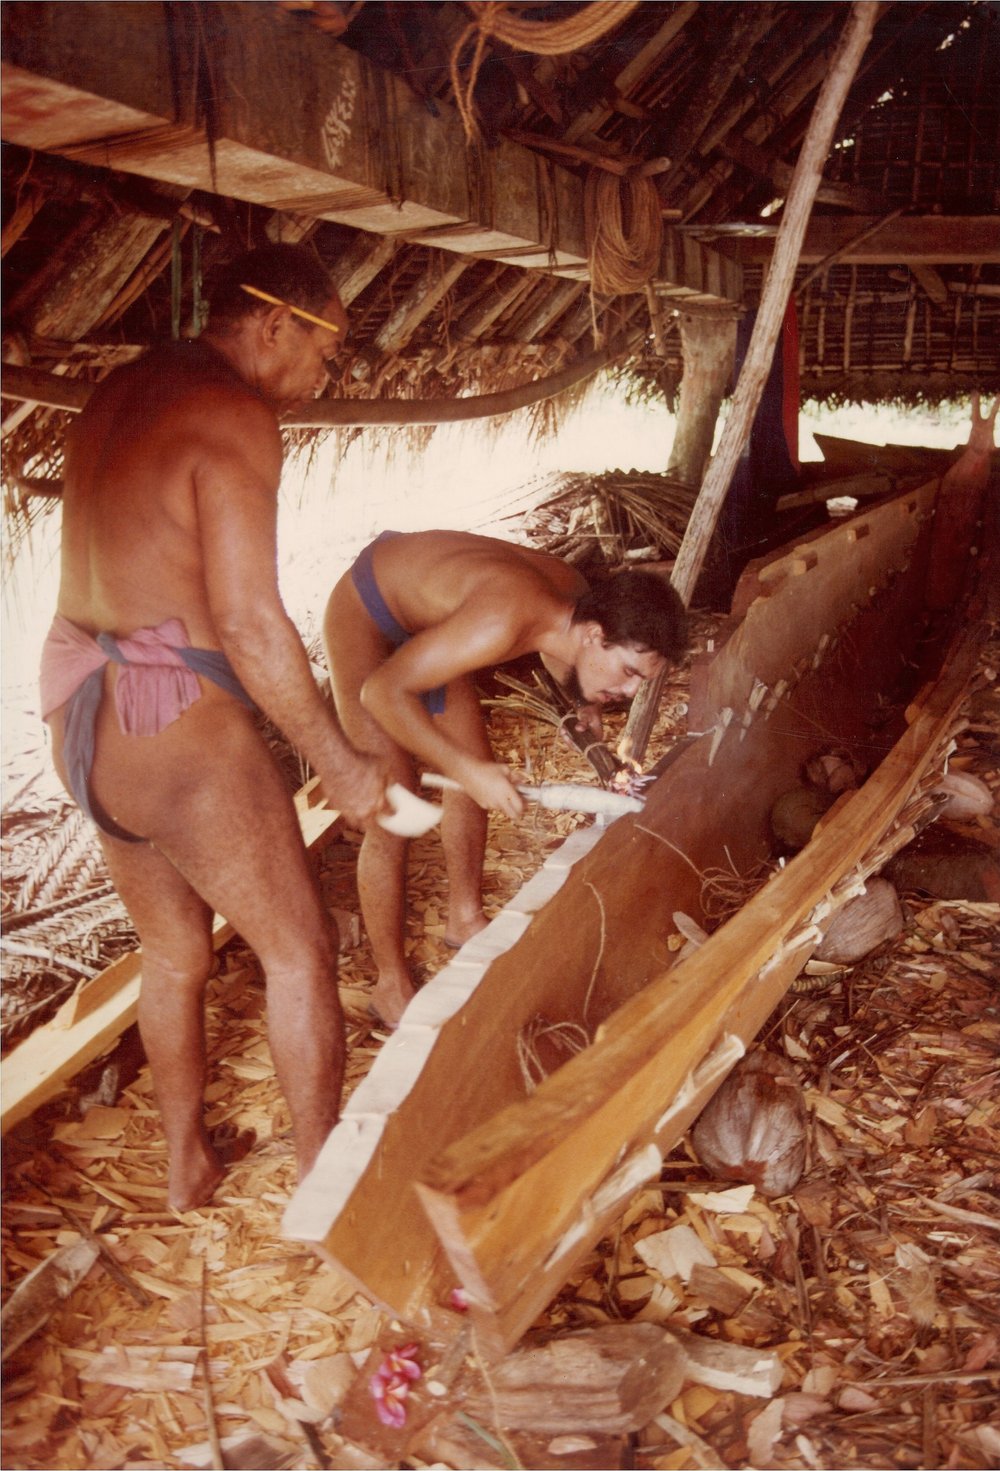  Master Navigator/Canoe Builder Tawa Tilimwar (left) and Rob Limtiaco (of Asan Village, Guahan) work on the sailing canoe ‘Kefetek’ in Lepoput Canoe House, Polowat Atoll Relong Village. They are ‘glue processing’ in preparation for lashing planks to 